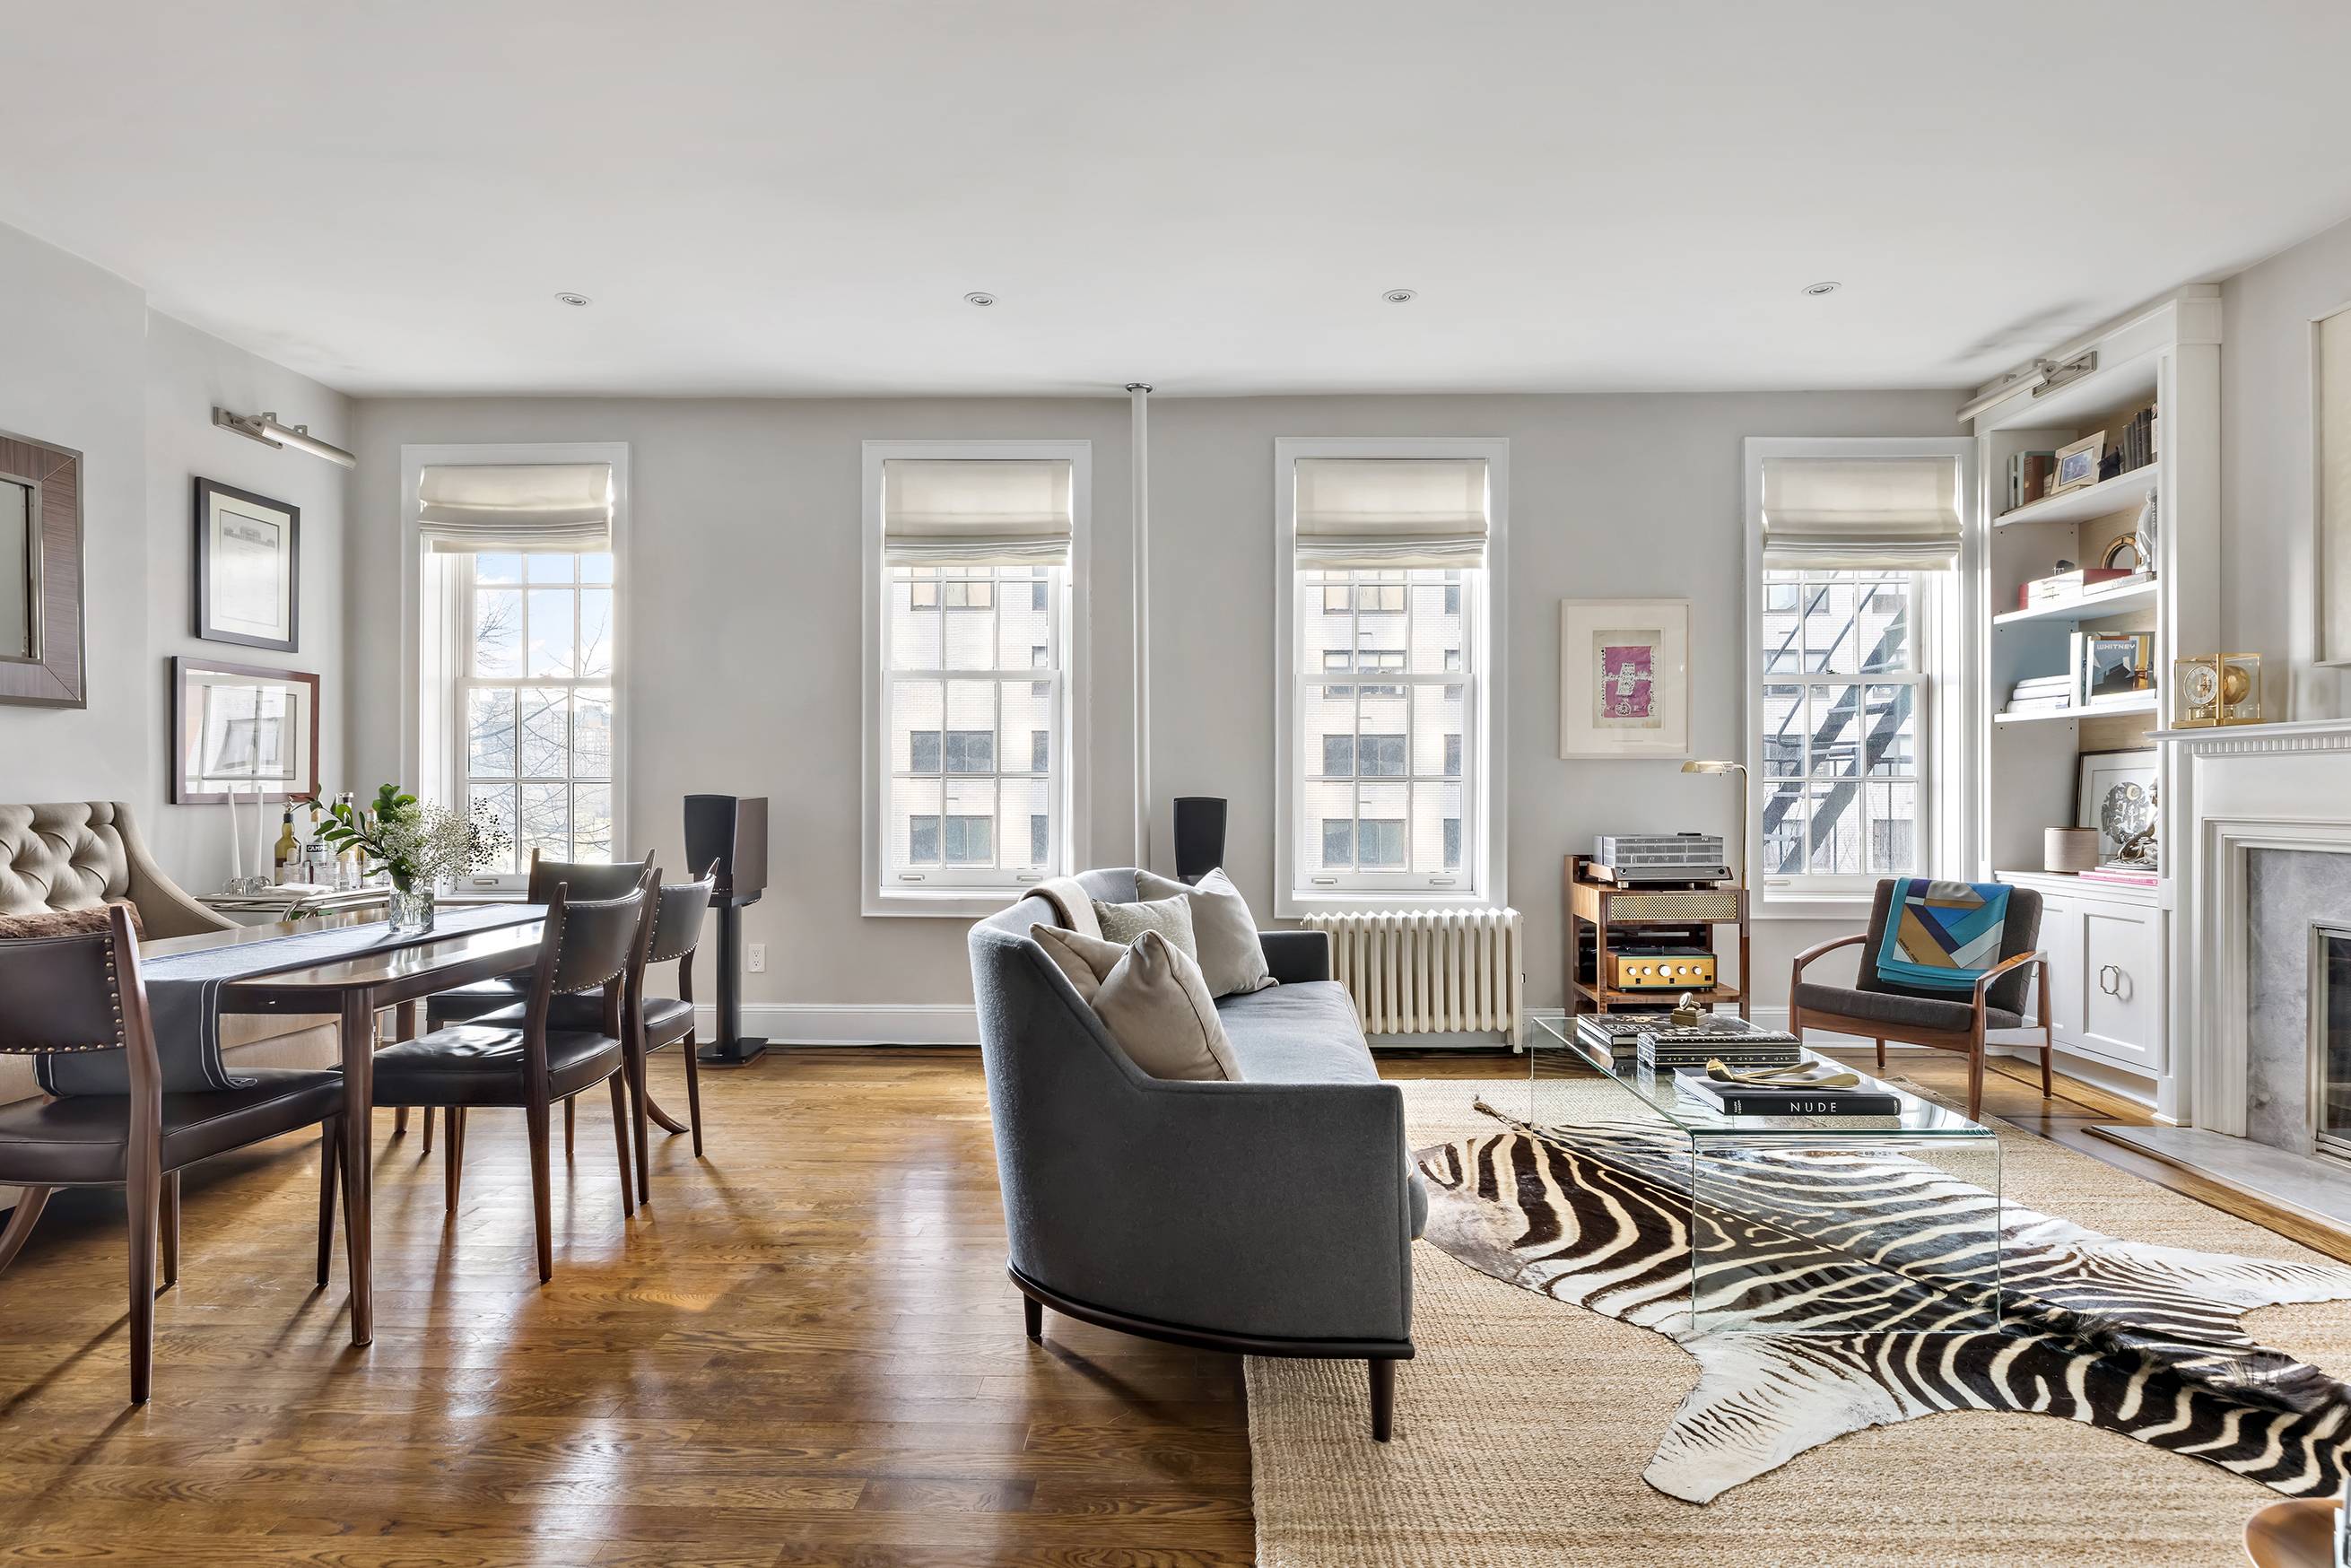 Artfully featured in Cottages amp ; Gardens and situated in Manhattan's Storied 'Black and Whites, this 2 bedroom, 2 bathroom fully renovated, turnkey home is the perfect combination of historic ...